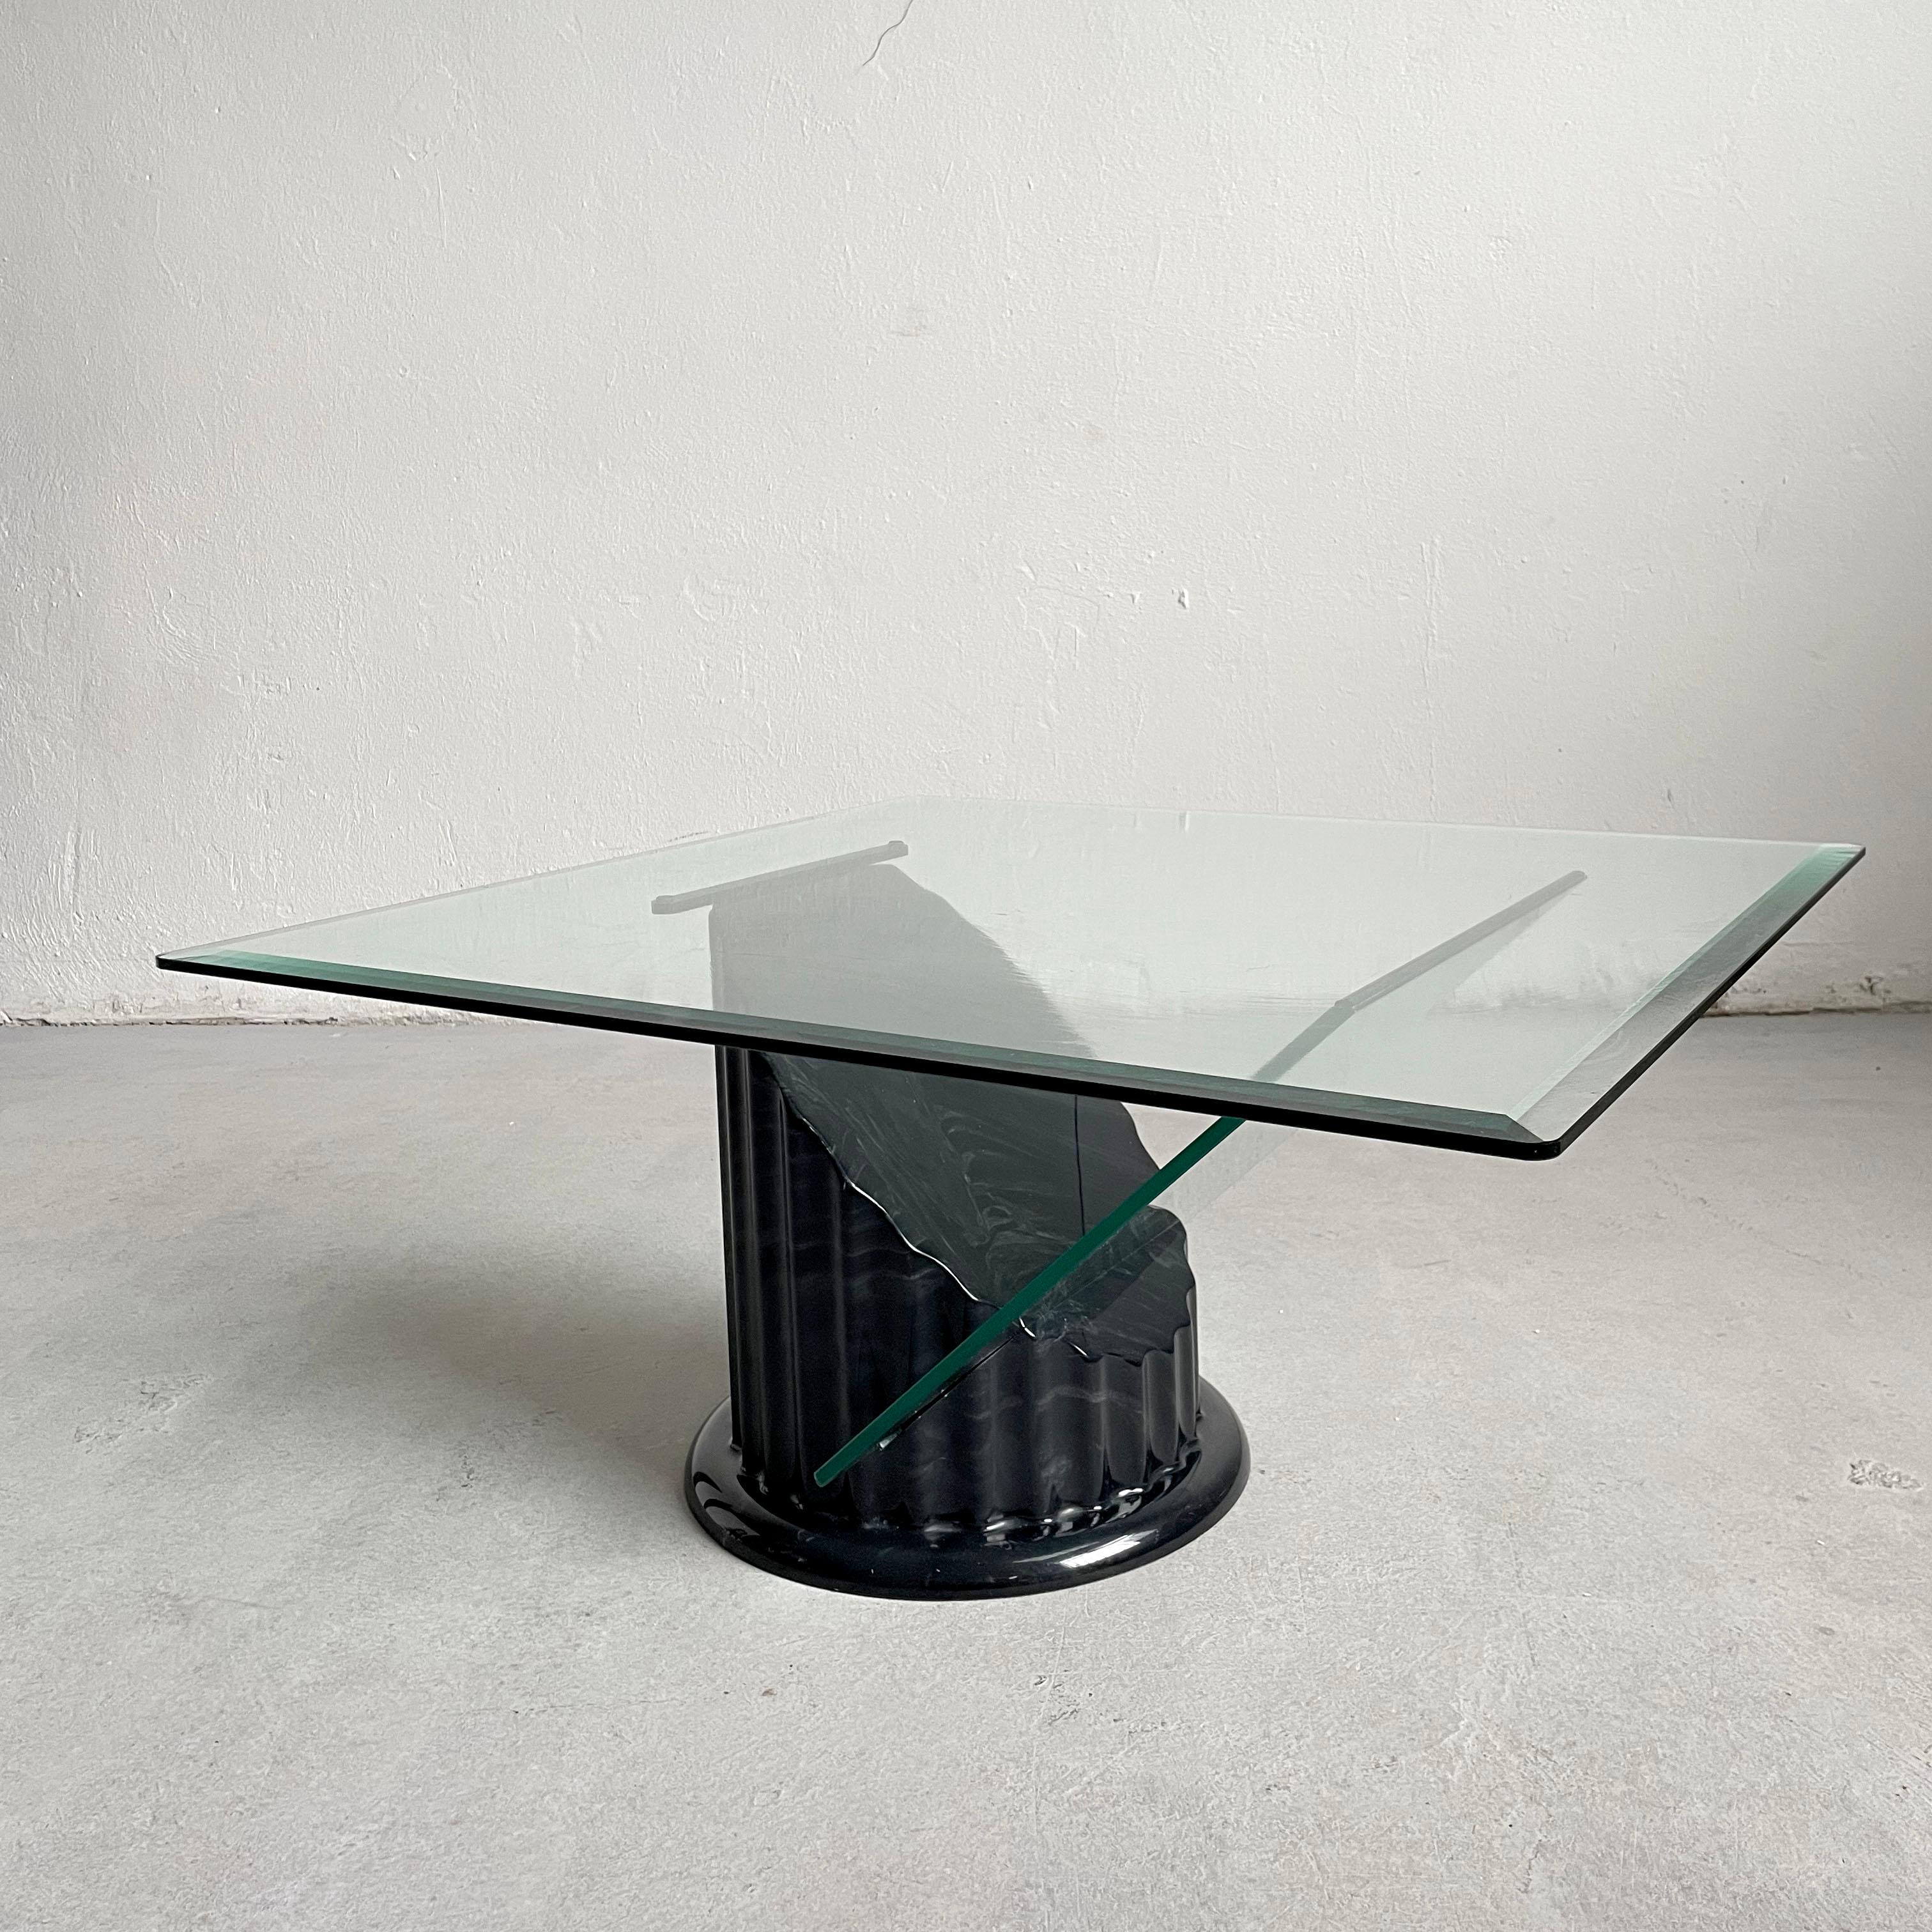 Postmodern Sculptural Coffee Table, Black Faux Marble and Glass, 1980s For Sale 5